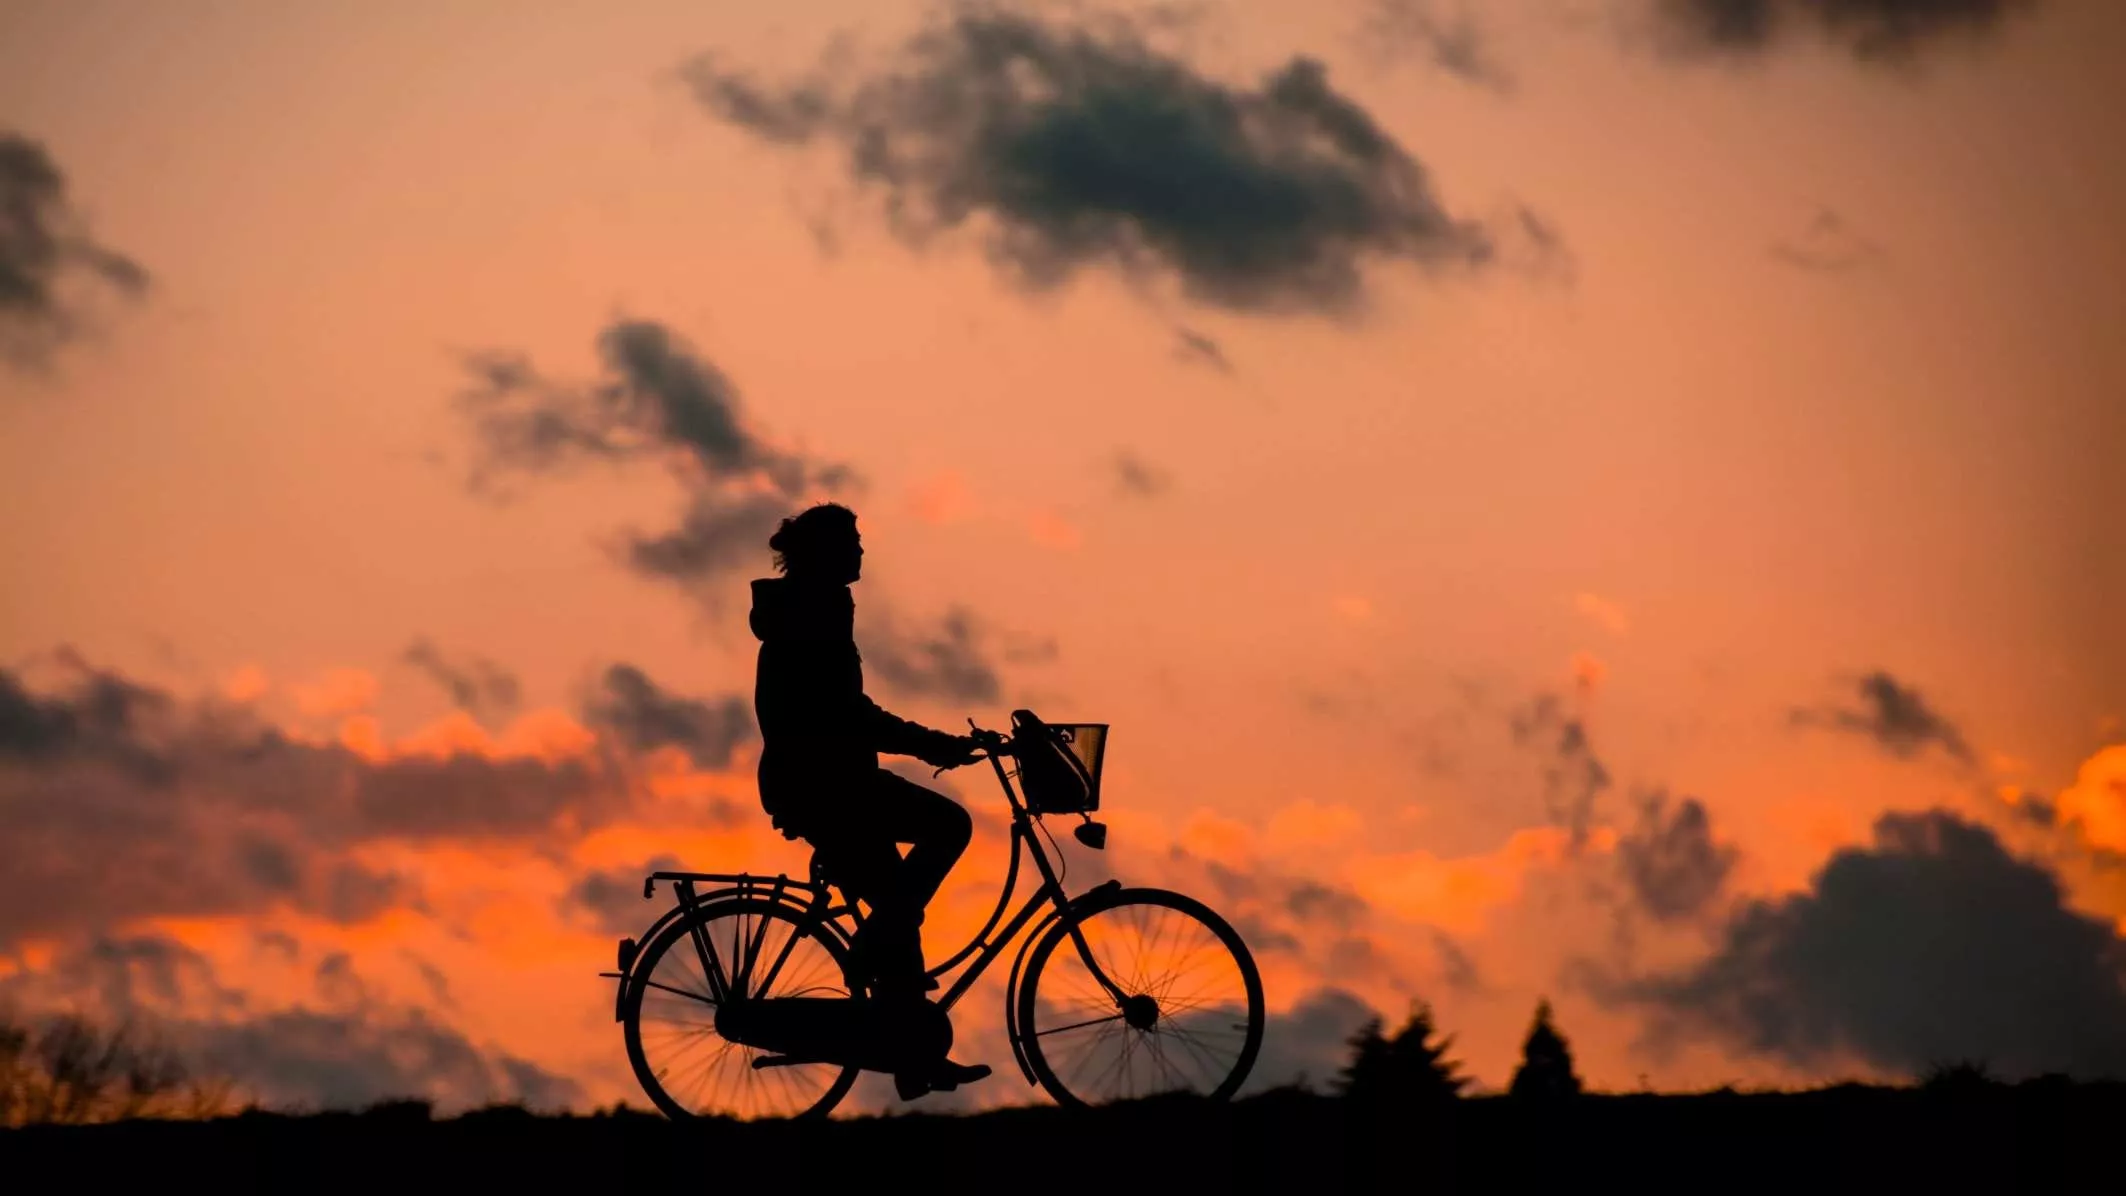 Silhouette of a person riding a bicycle against a sunset sky.